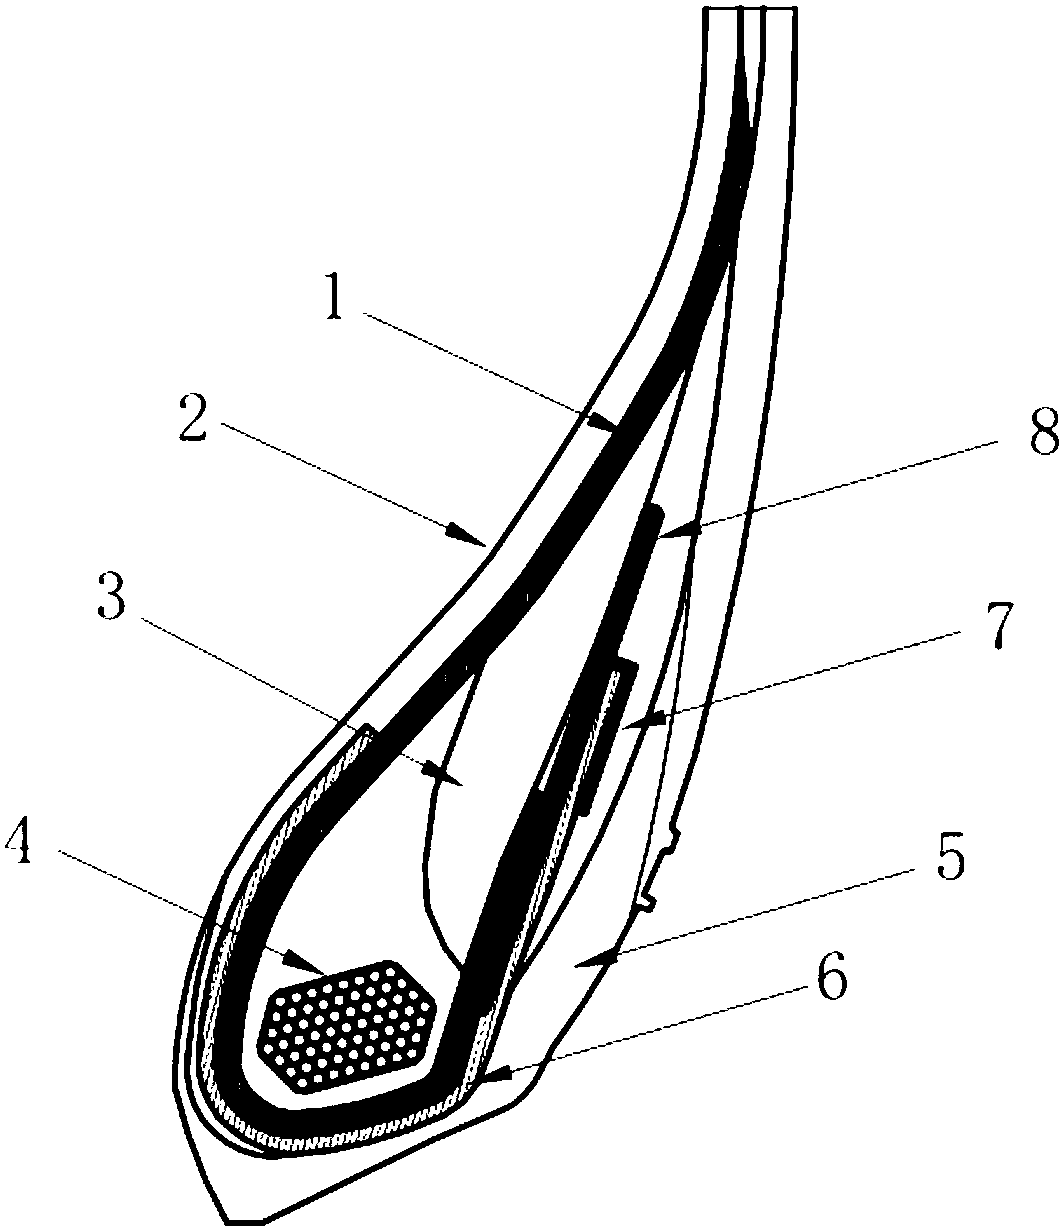 A preparation method of an all-steel radial tire reinforced with a steel wire-wrapped composite part